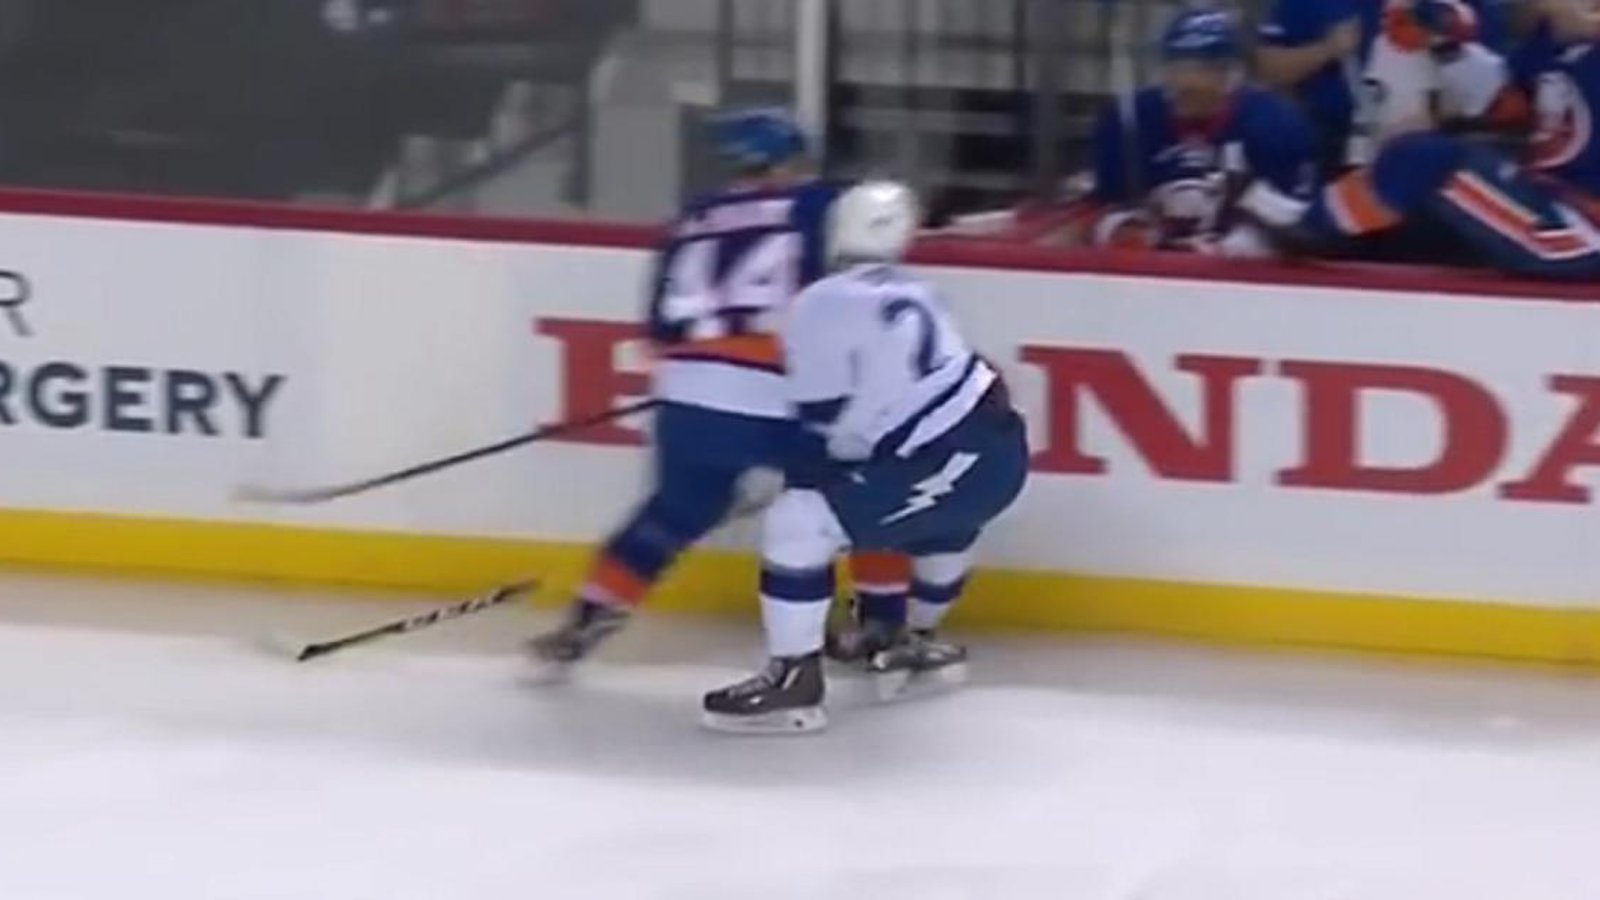 Lightning player leaves game after elbow to head